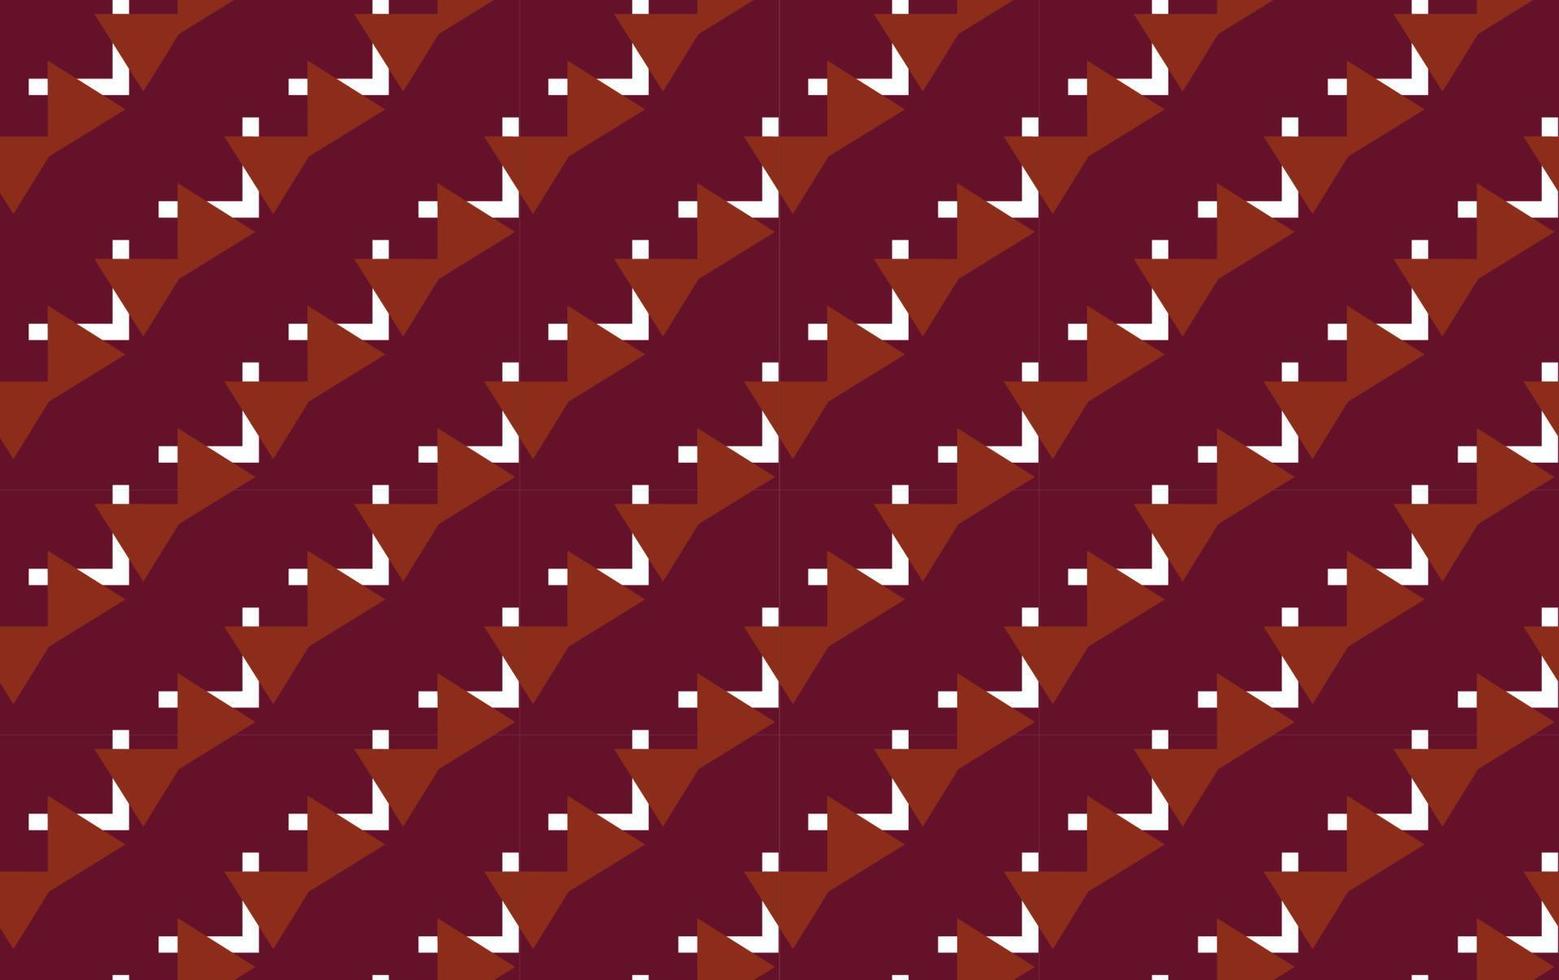 Vector seamless pattern, abstract texture background, repeating tiles, three colors